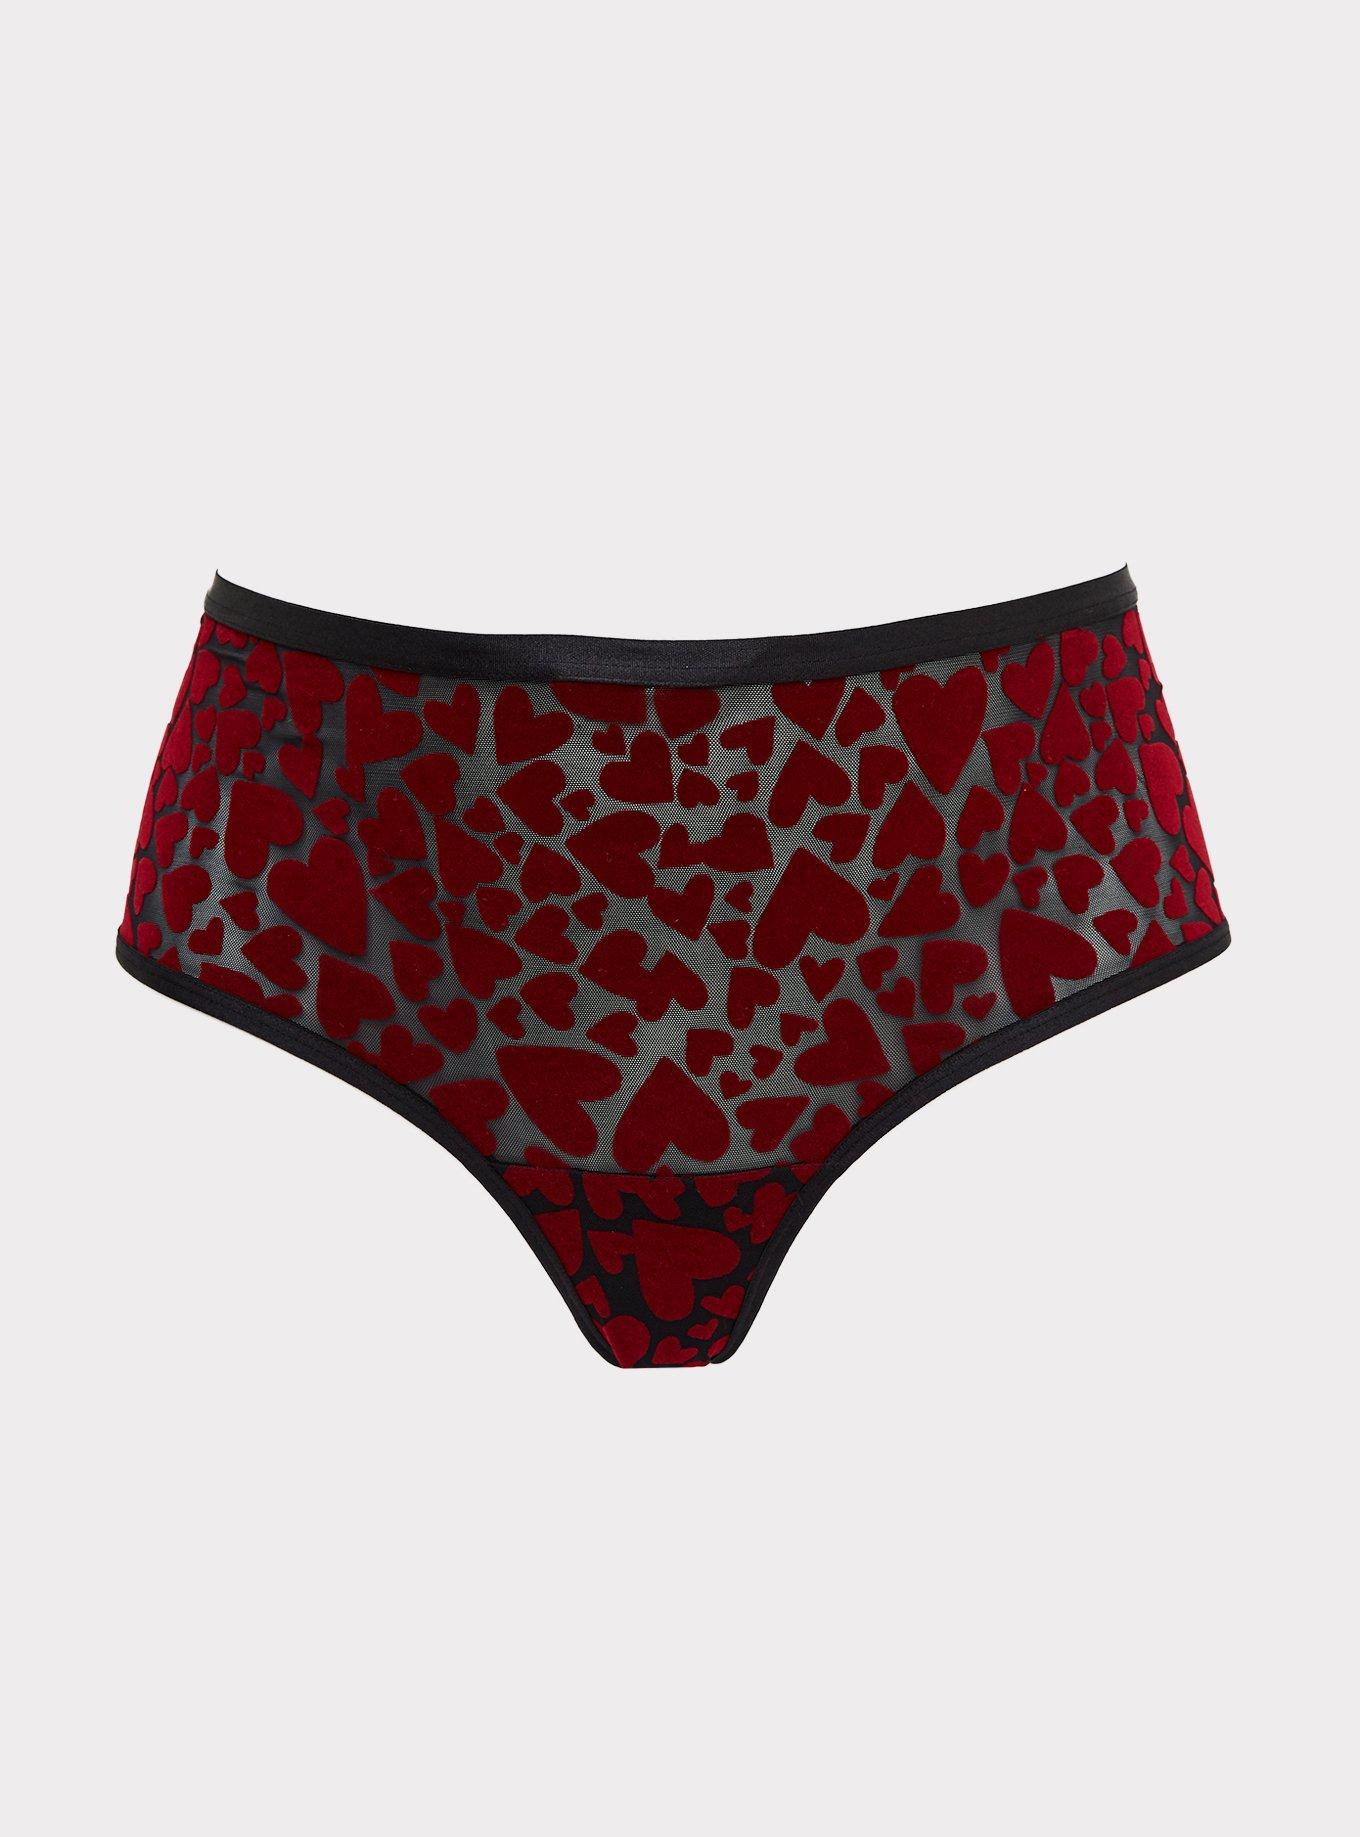 Plus Size - Black Mesh & Red Heart Flocked Cutout Cheeky Panty